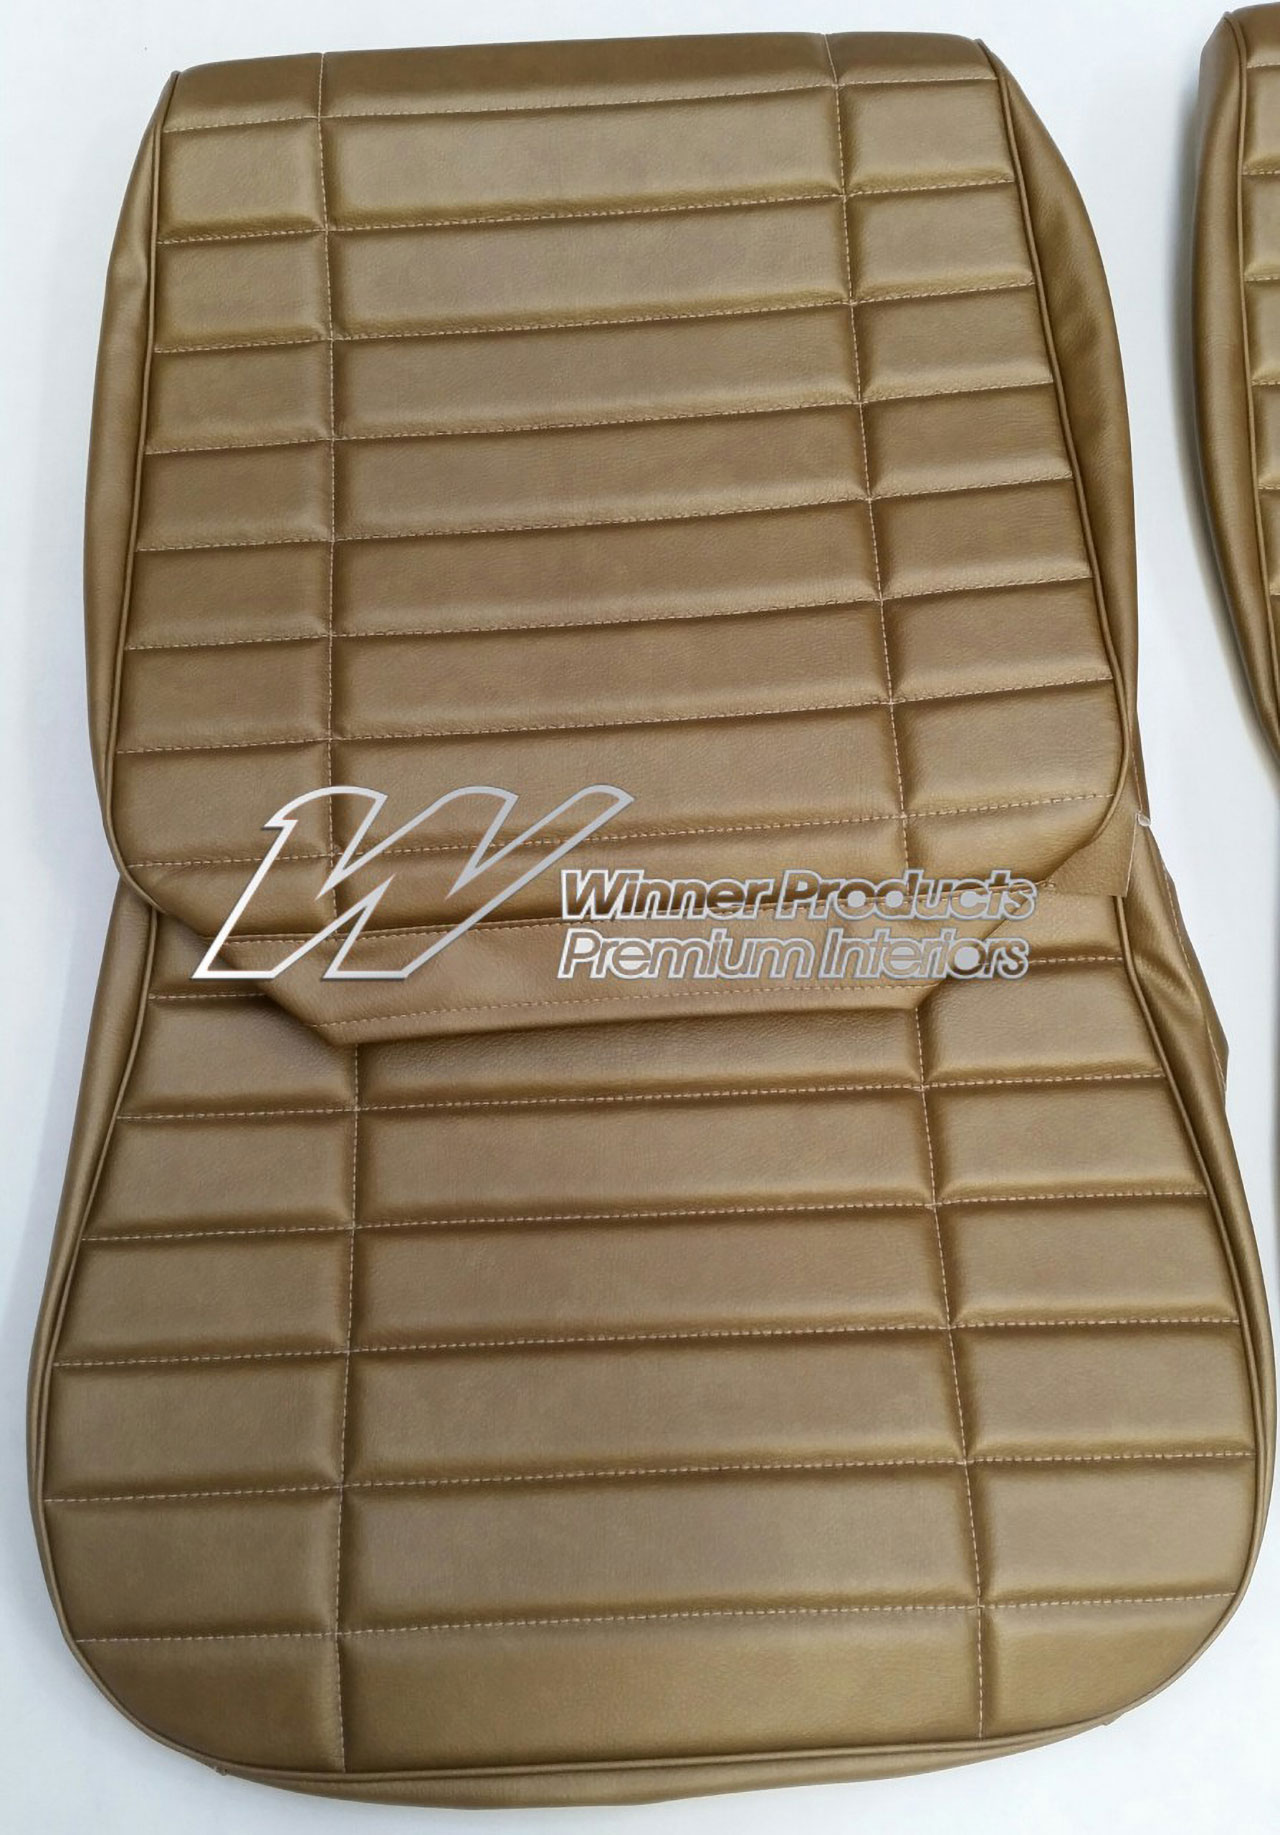 Holden Monaro HG Monaro GTS Coupe 11X Antique Gold Seat Covers (Image 3 of 4)